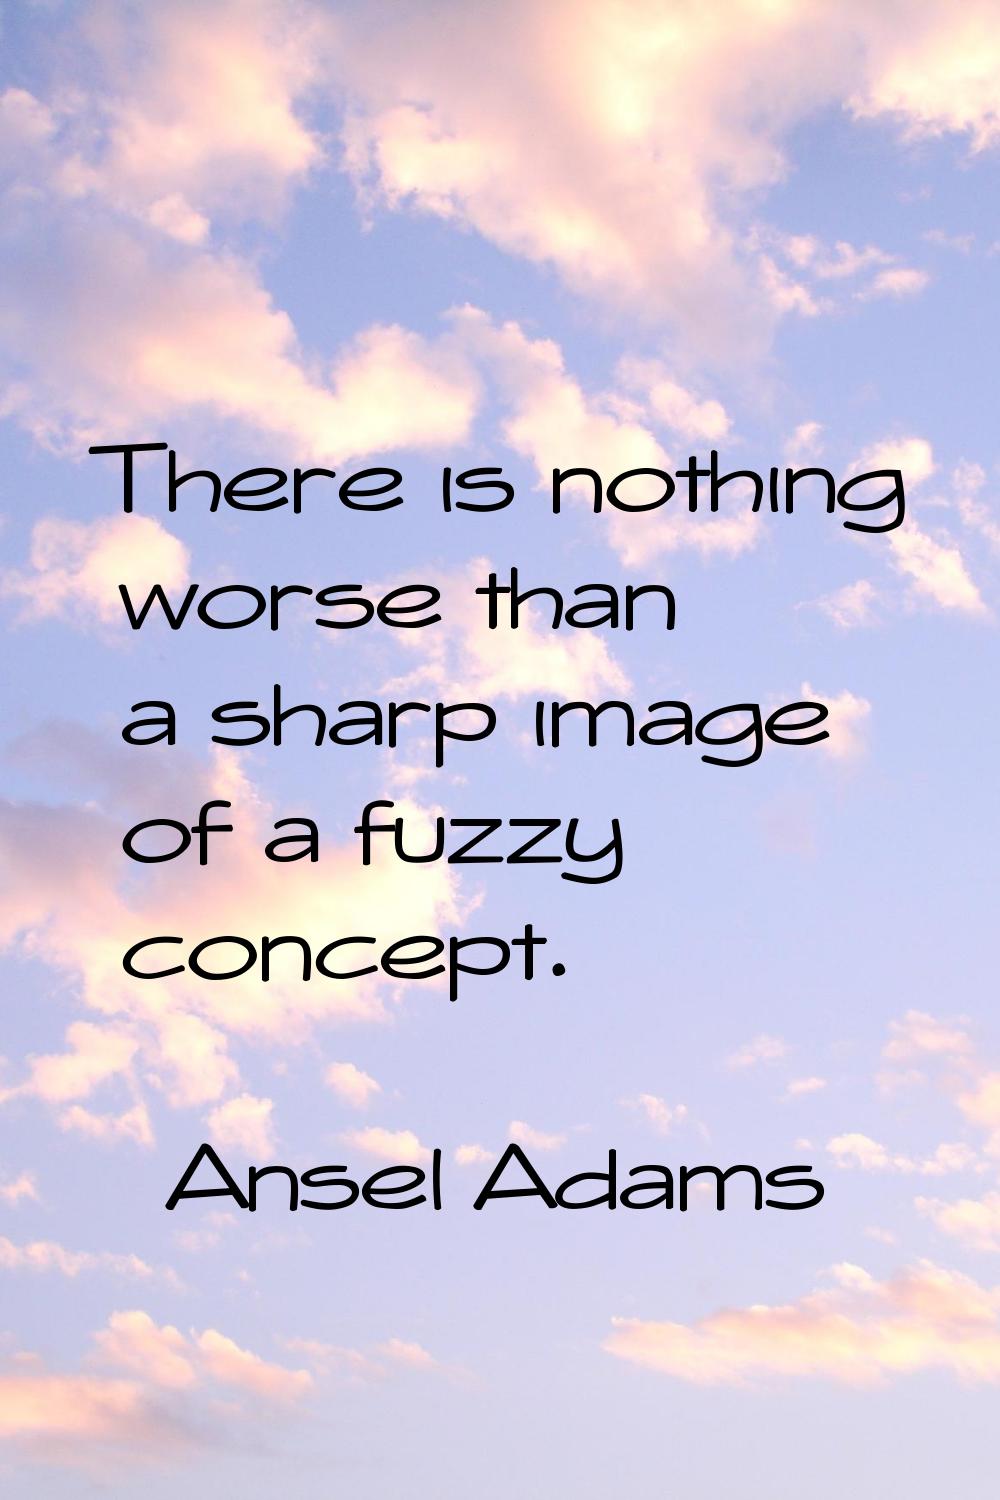 There is nothing worse than a sharp image of a fuzzy concept.